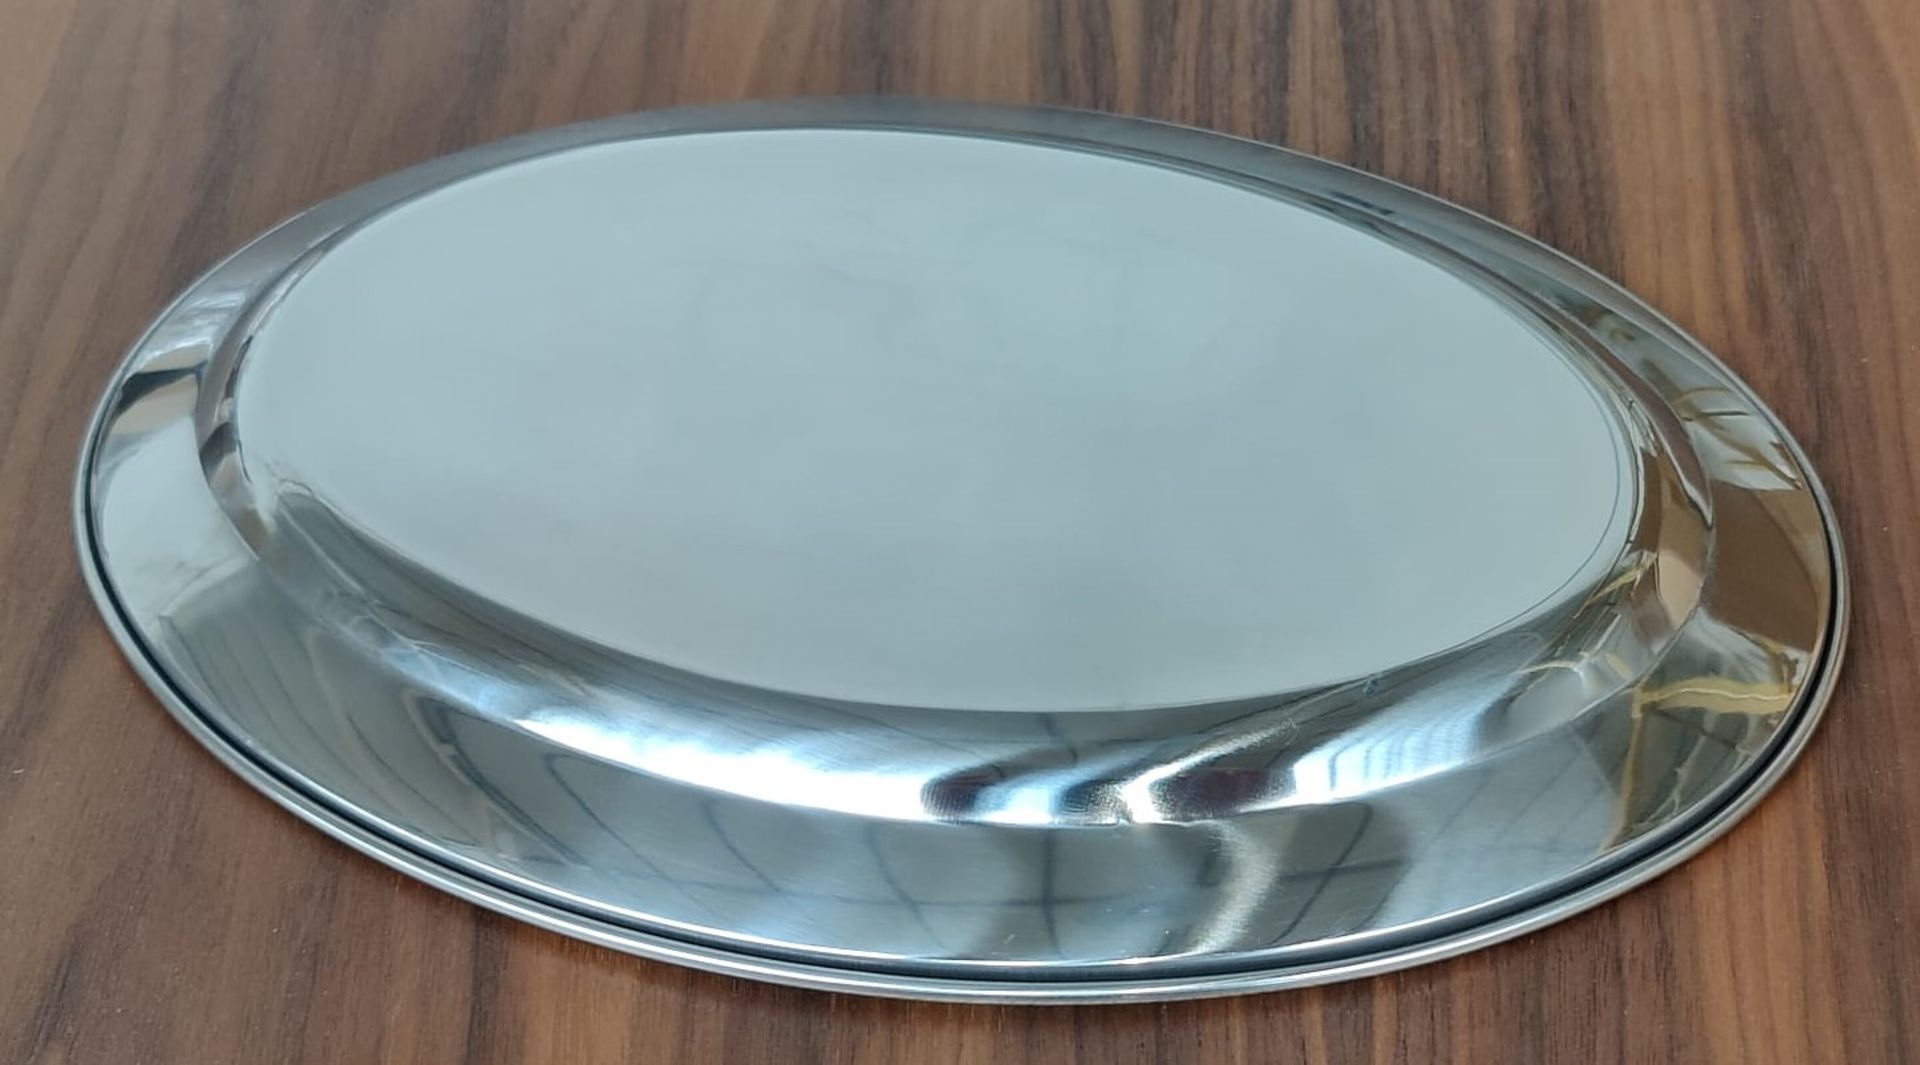 18 x Stainless Steel Small Oval Service Trays - Size: 255mm x 180mm - Brand New Boxed Stock RRP £90 - Image 3 of 8